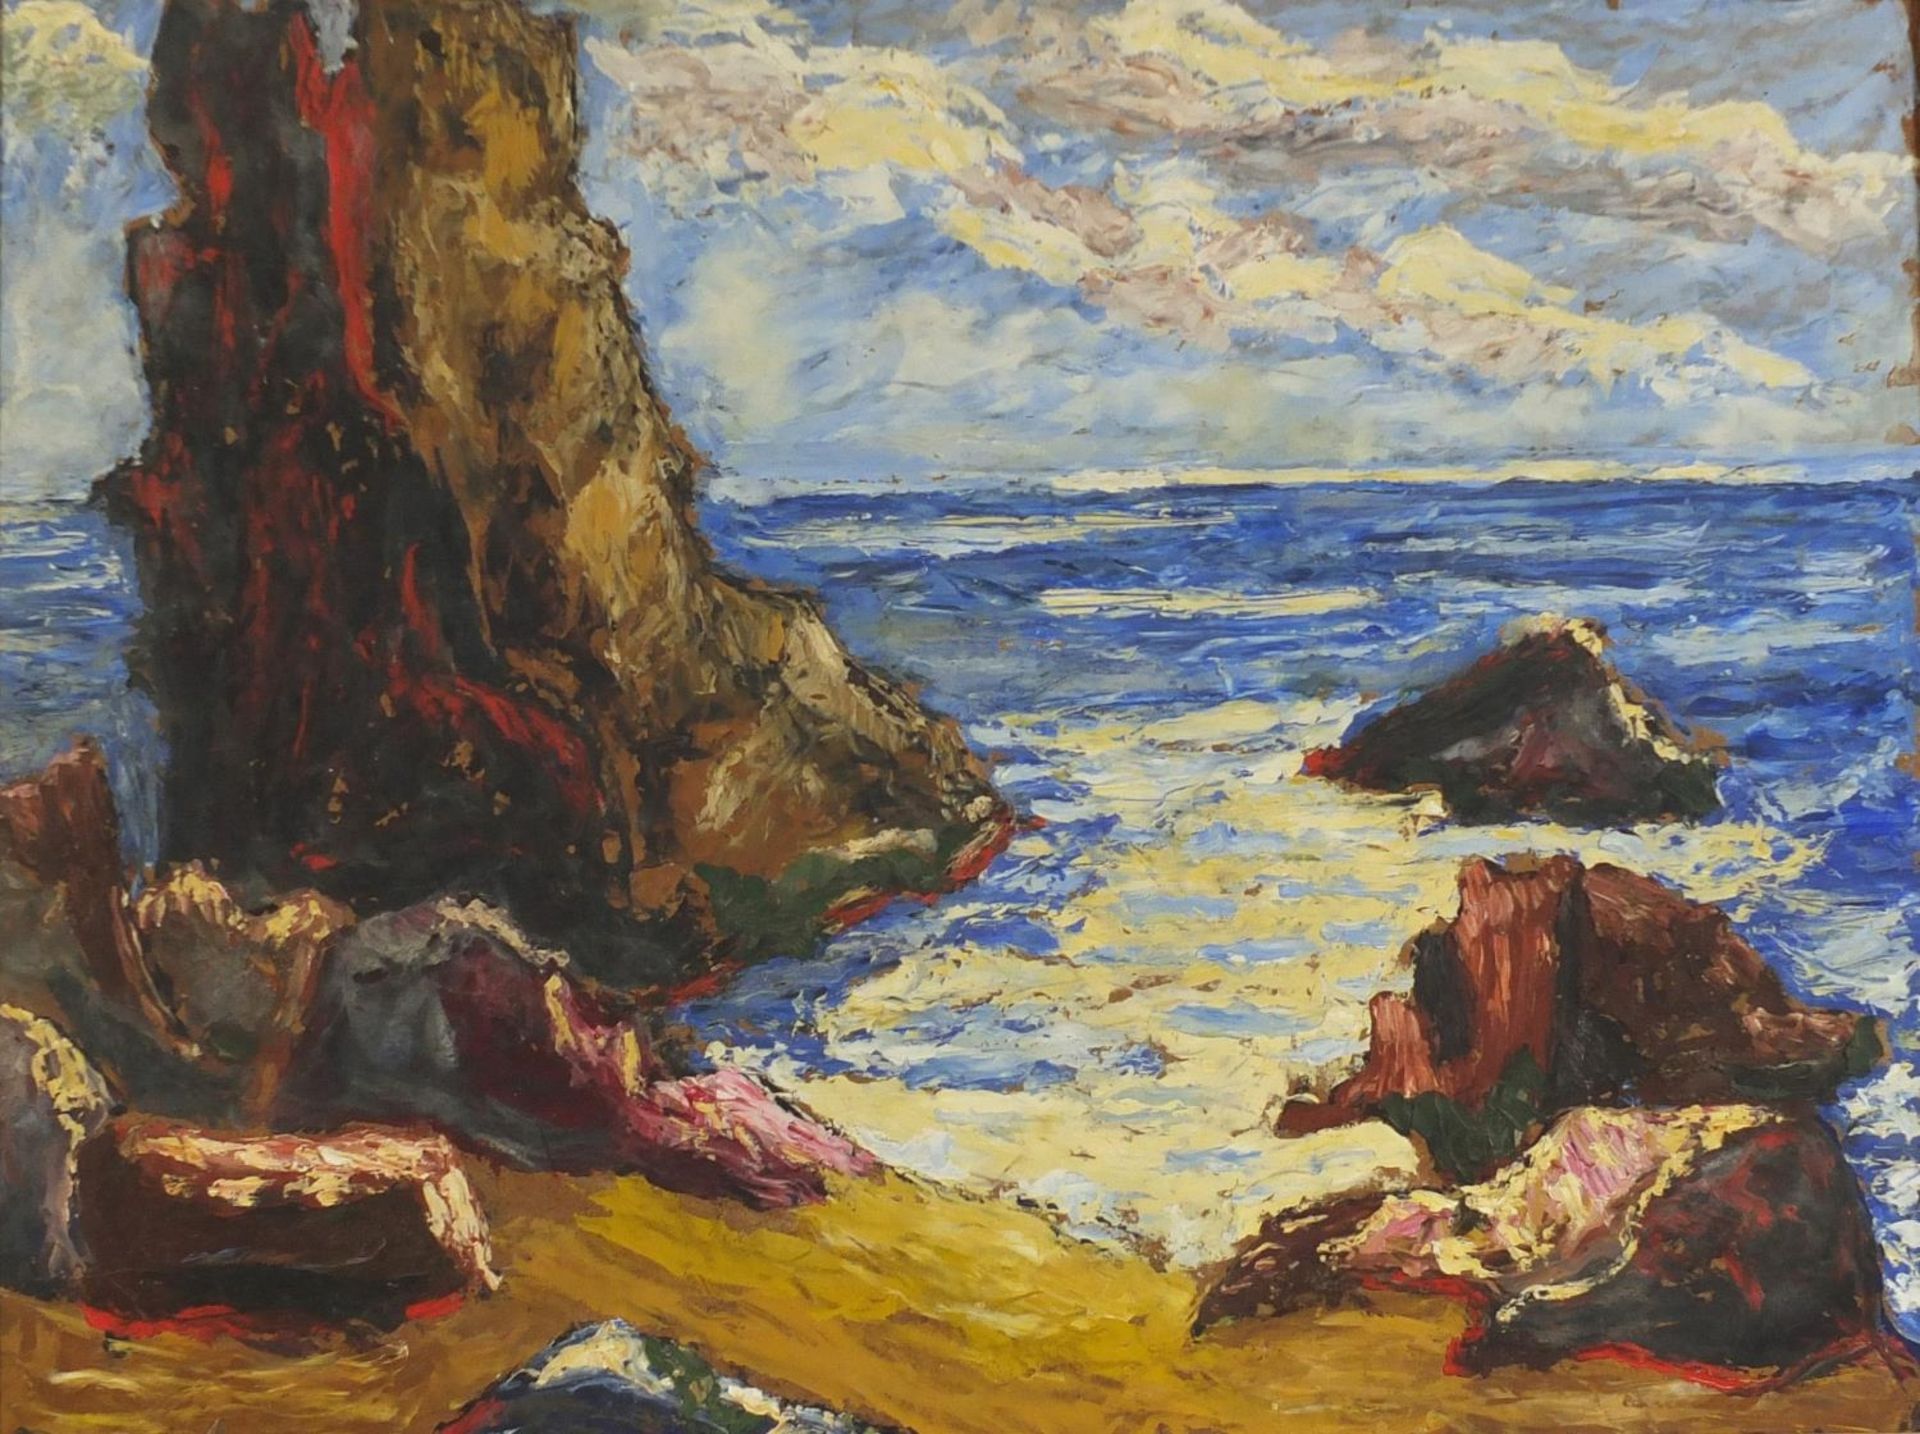 Rocky coastal scene, Expressionist oil on board, mounted and framed, 59cm x 44cm excluding the mount